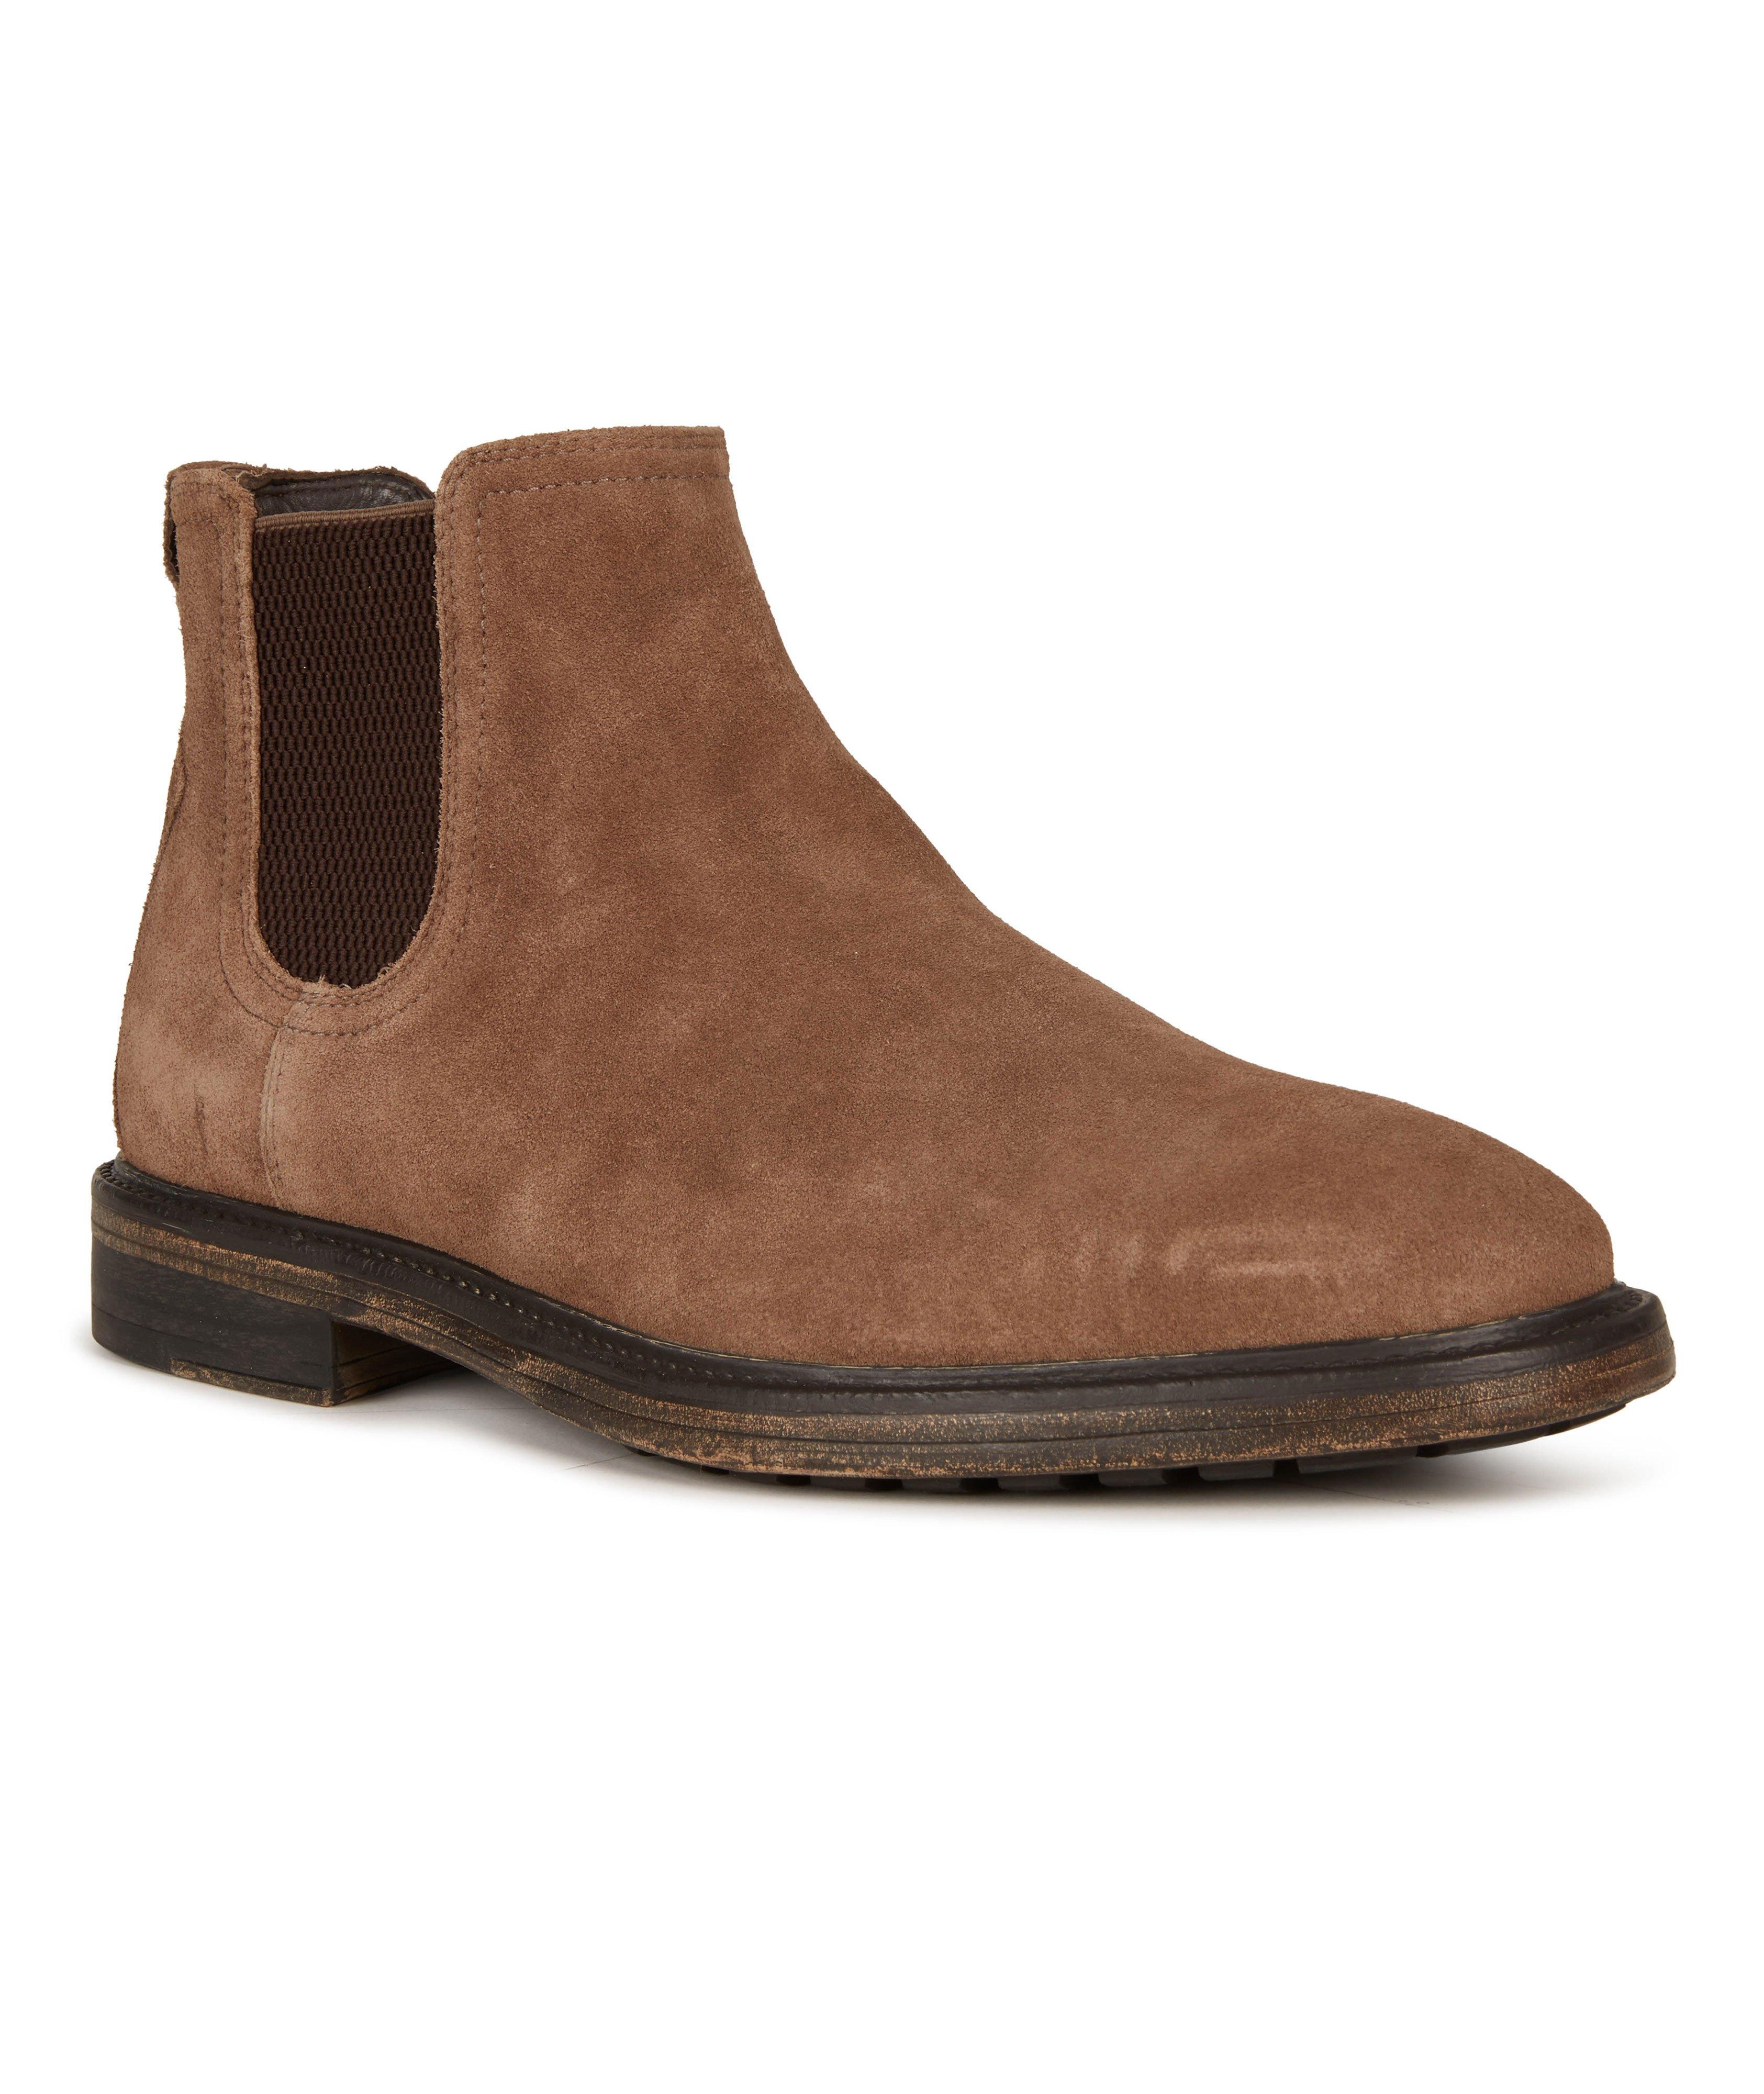 Leather Chelsea Boot image 0